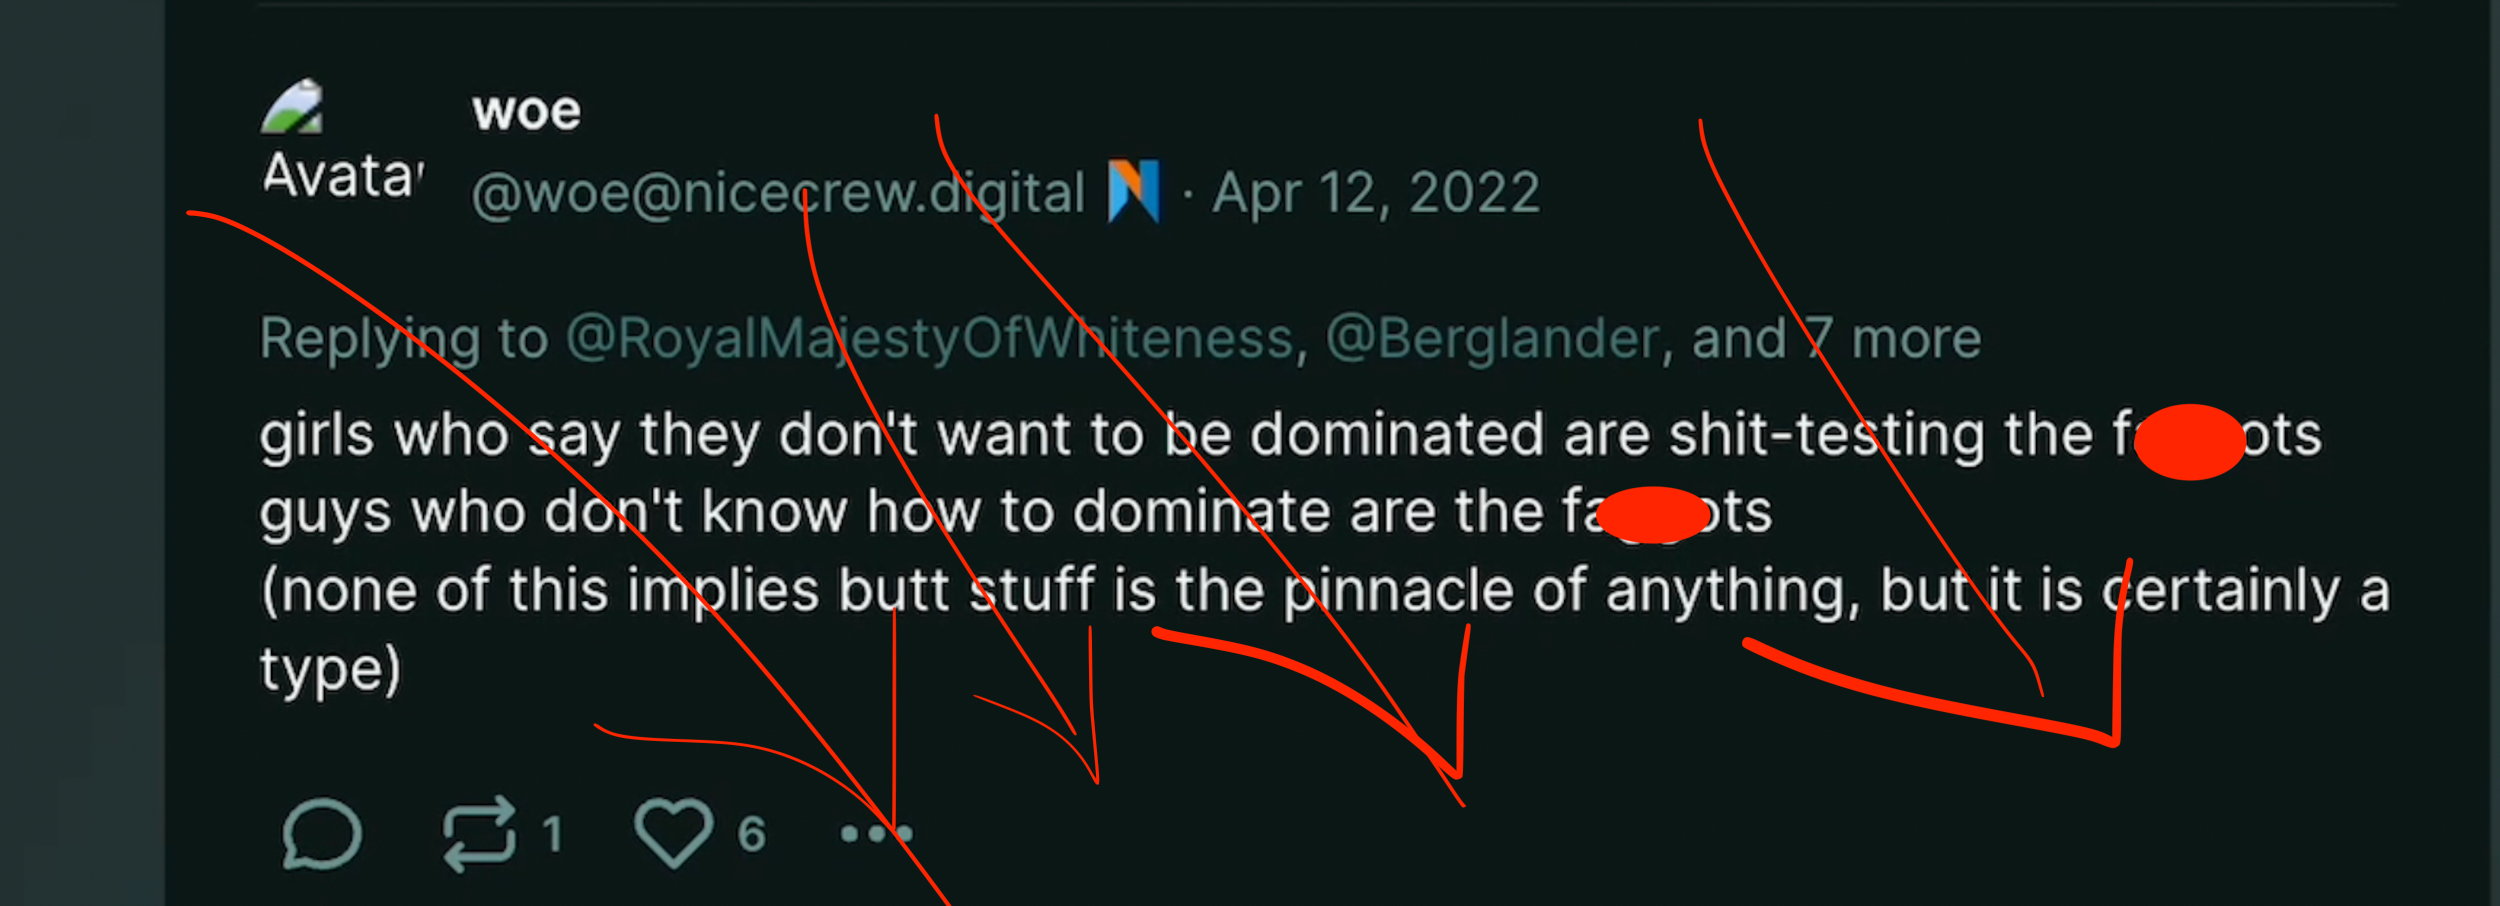 TW: homophobia, misogyny. Dumperth on Poast: "Girls who say they don't want to be dominated are shit testing the f----ts. Guys who don't know how to dominate are the f----ts. (none of this implies butt stuff is the pinnacle of anything, but it is certainly a type)"